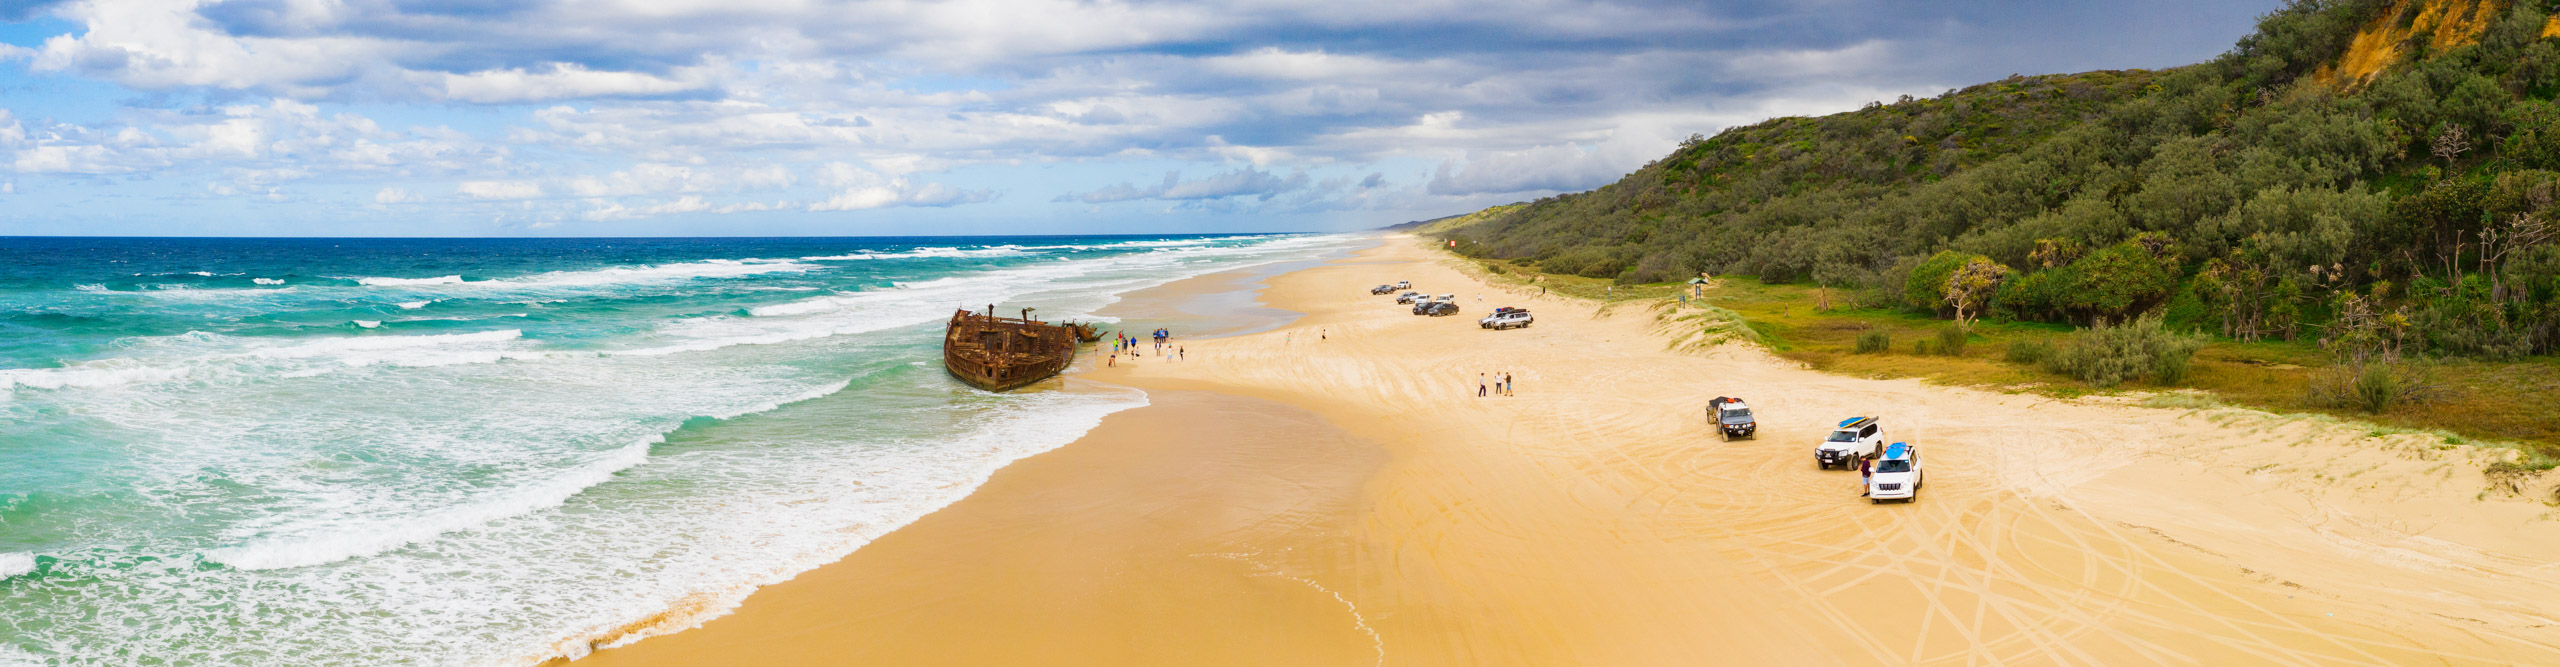 4x4 vehicles in the beach at Fraser Island, on a cloudy but sunny day, Queensland, Australia 